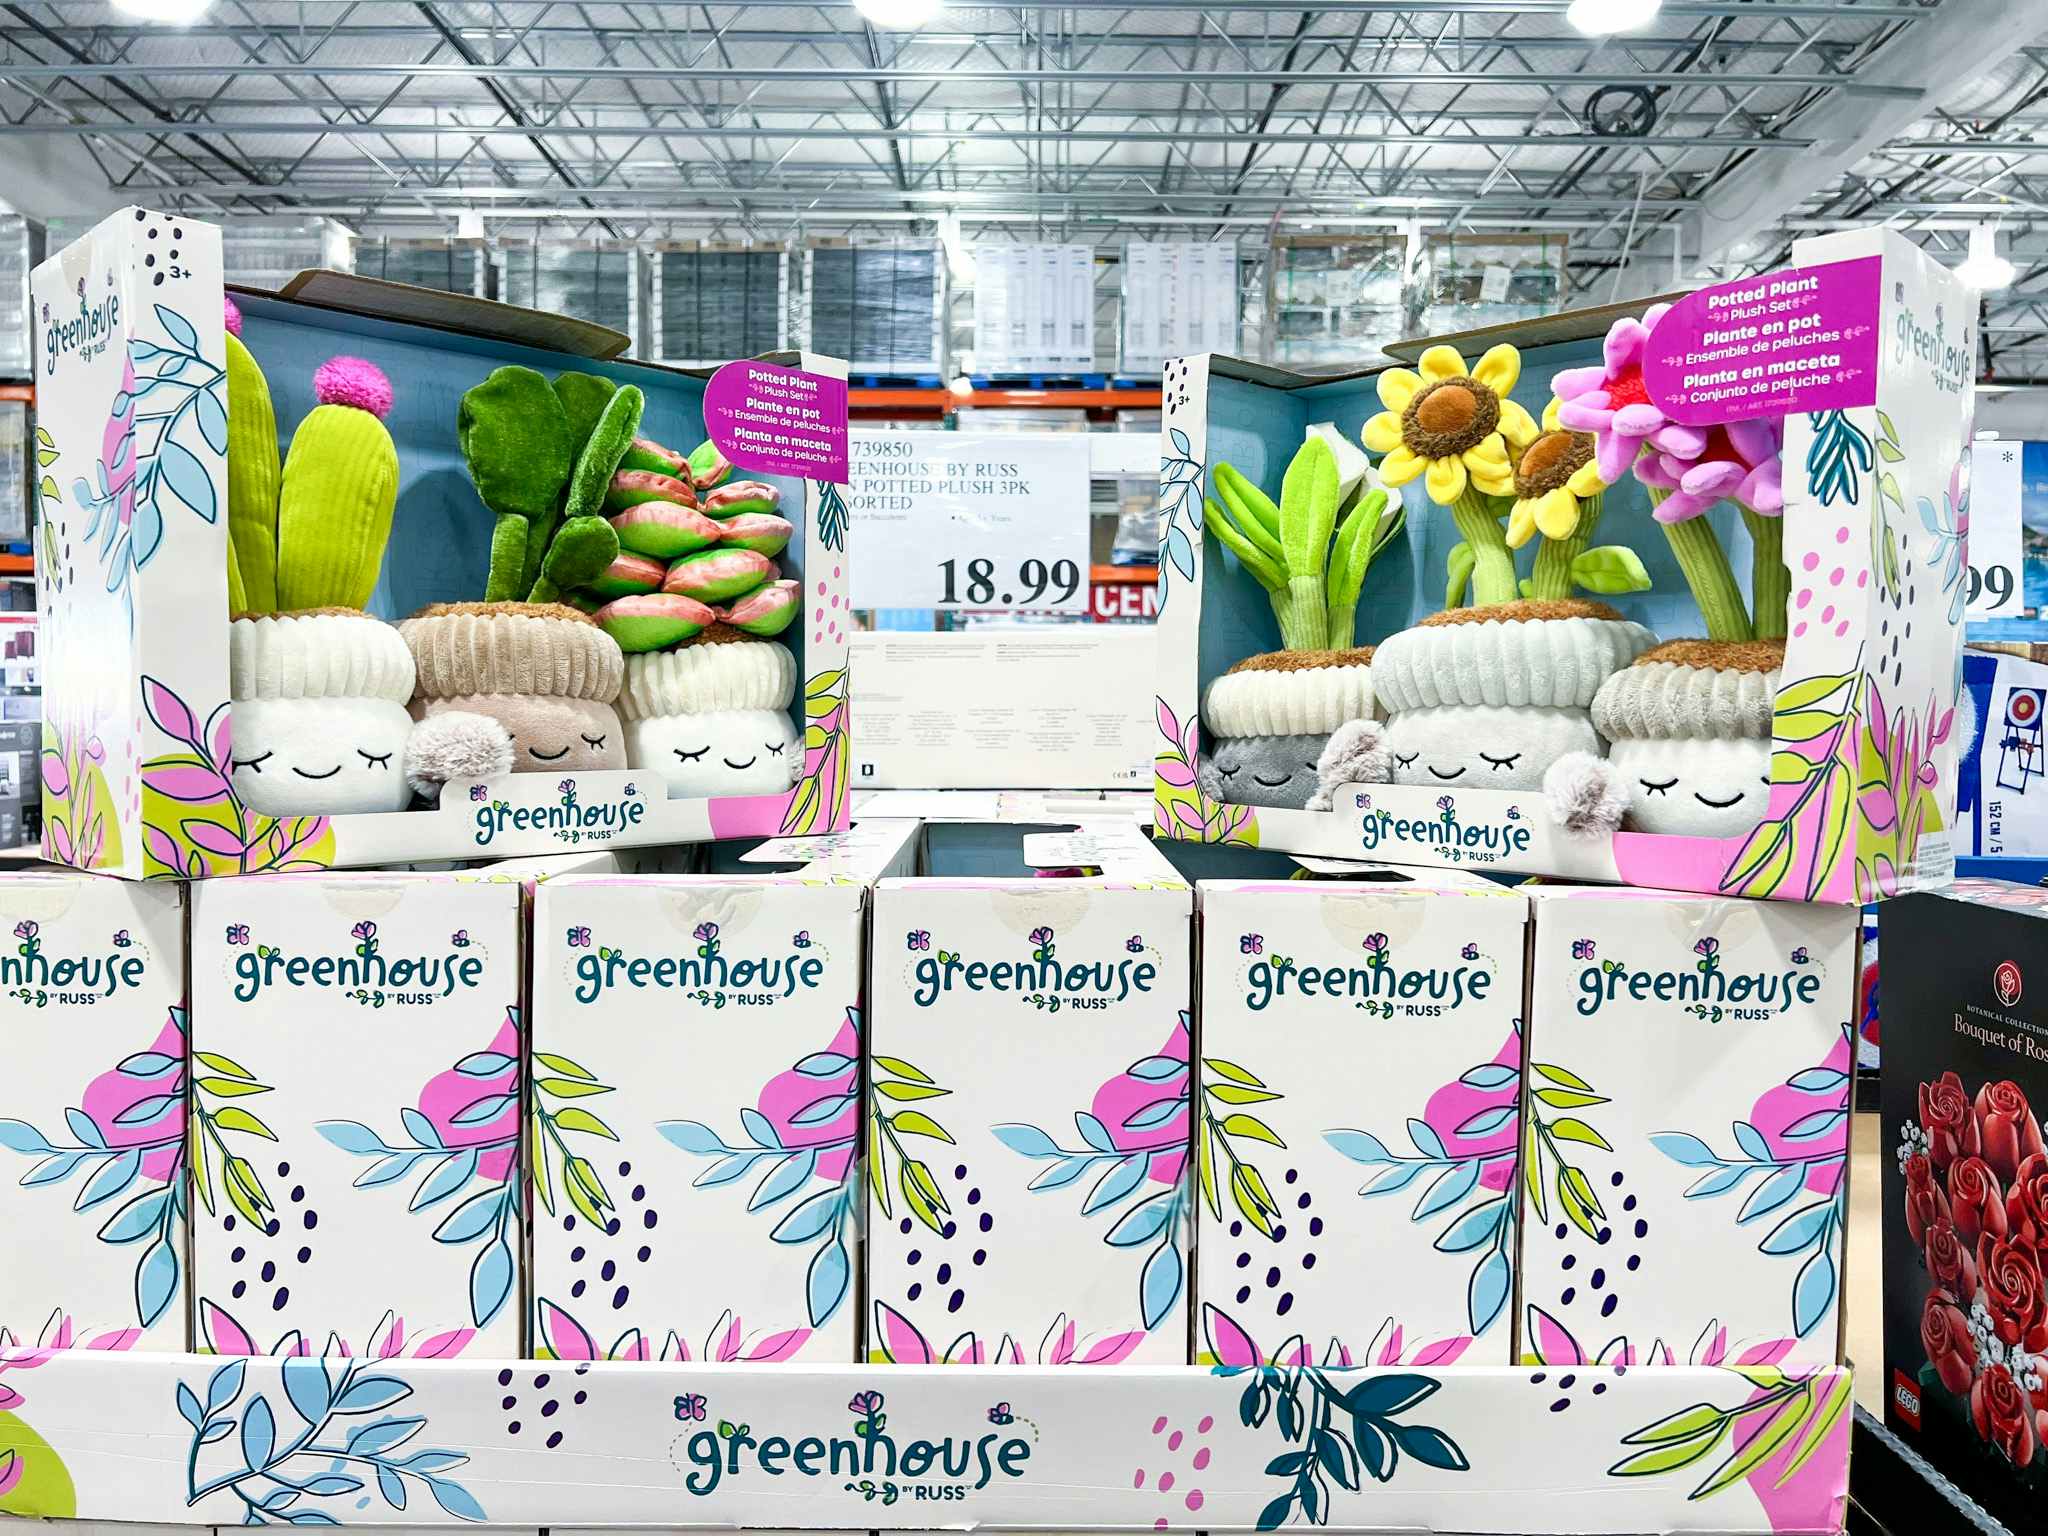 costco greenhouse by russ 12 inch plush plants 3 pack